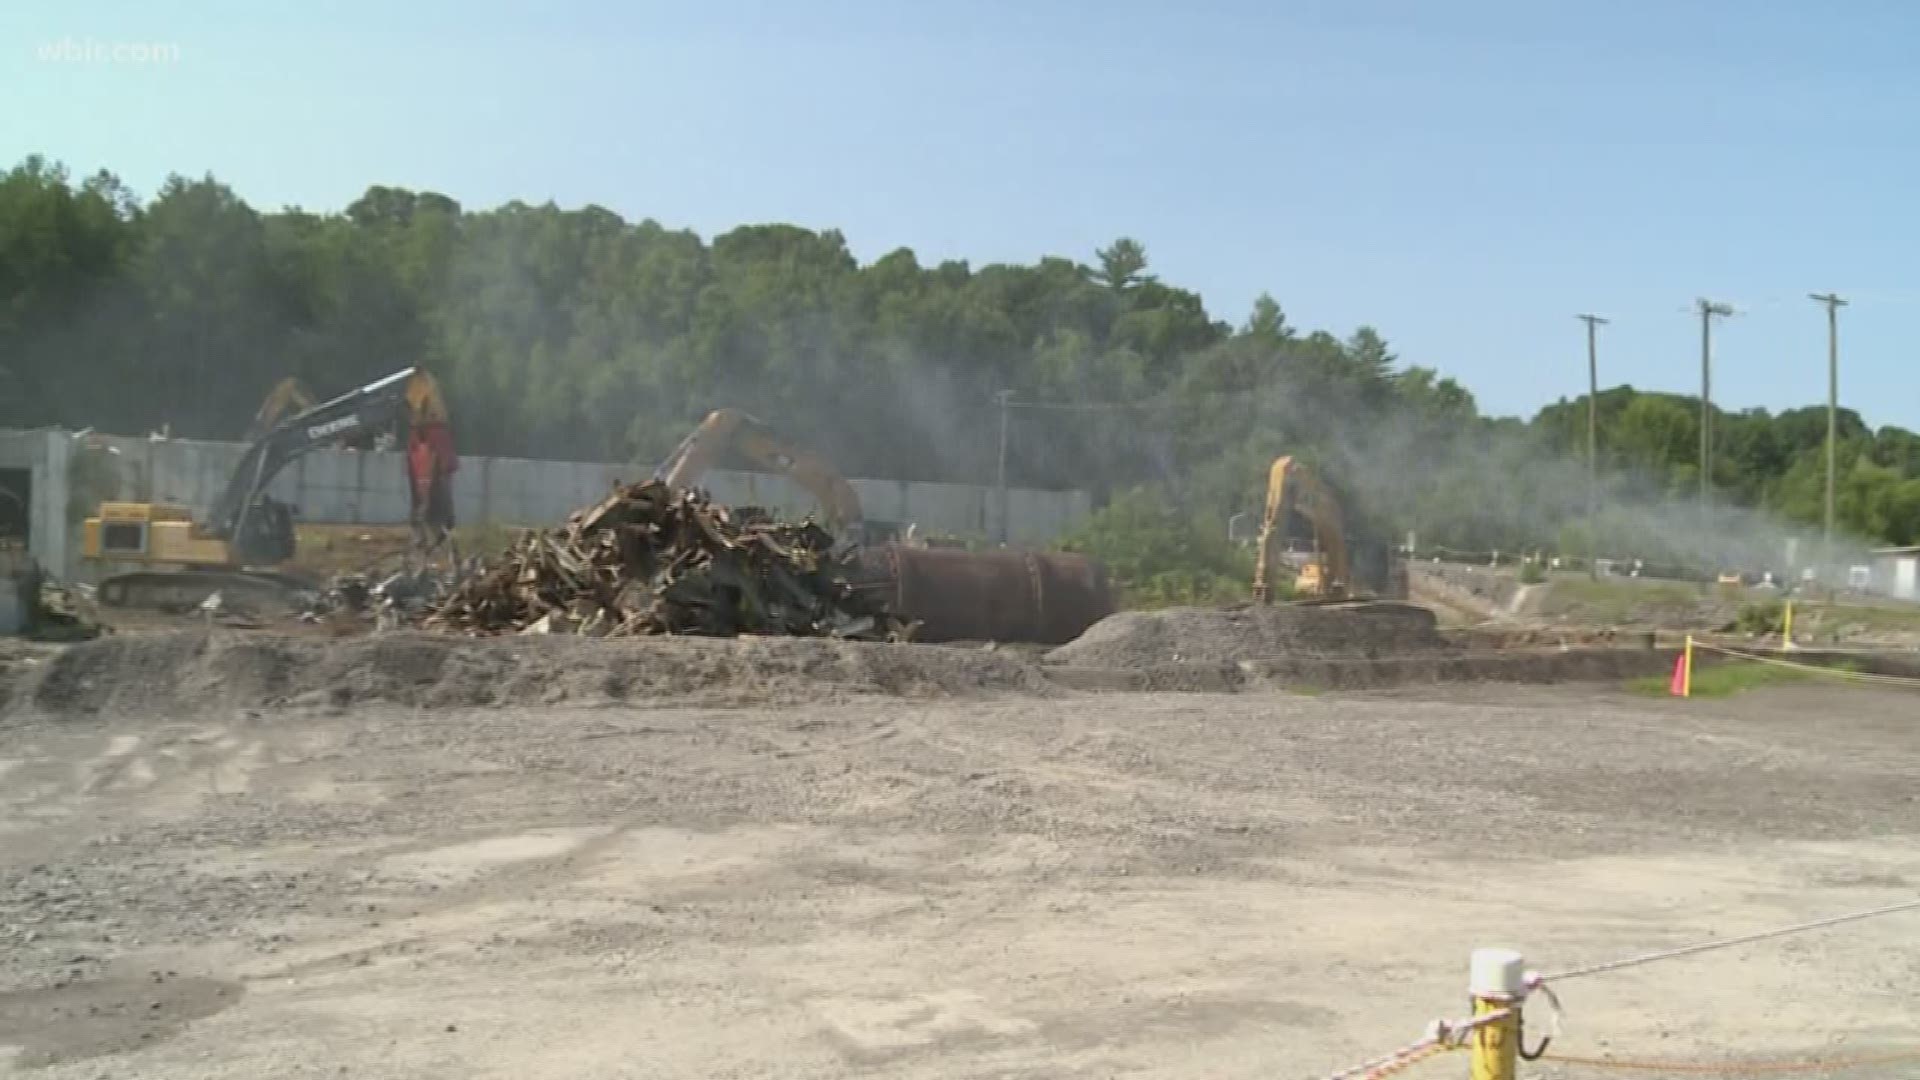 The Tosca Incinerator in Oak Ridge has been demolished as part of a hazardous material site cleanup in the East Tennessee Technology Park.